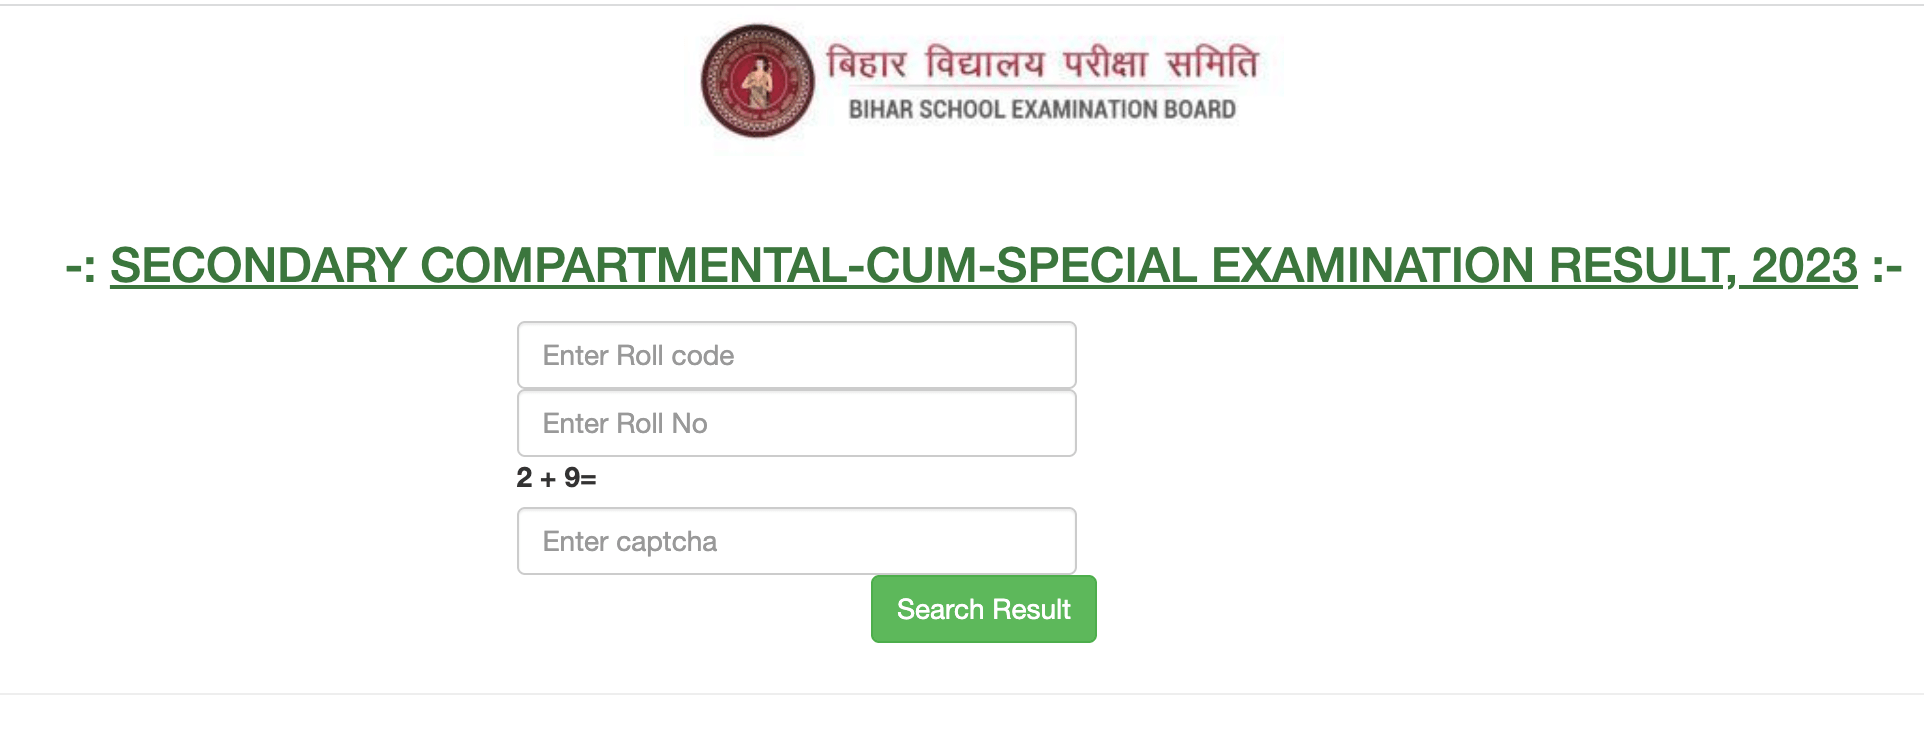 Bihar Board 10th Compartment Result 2023 Out, BSEB Class 10 Result Link_5.1